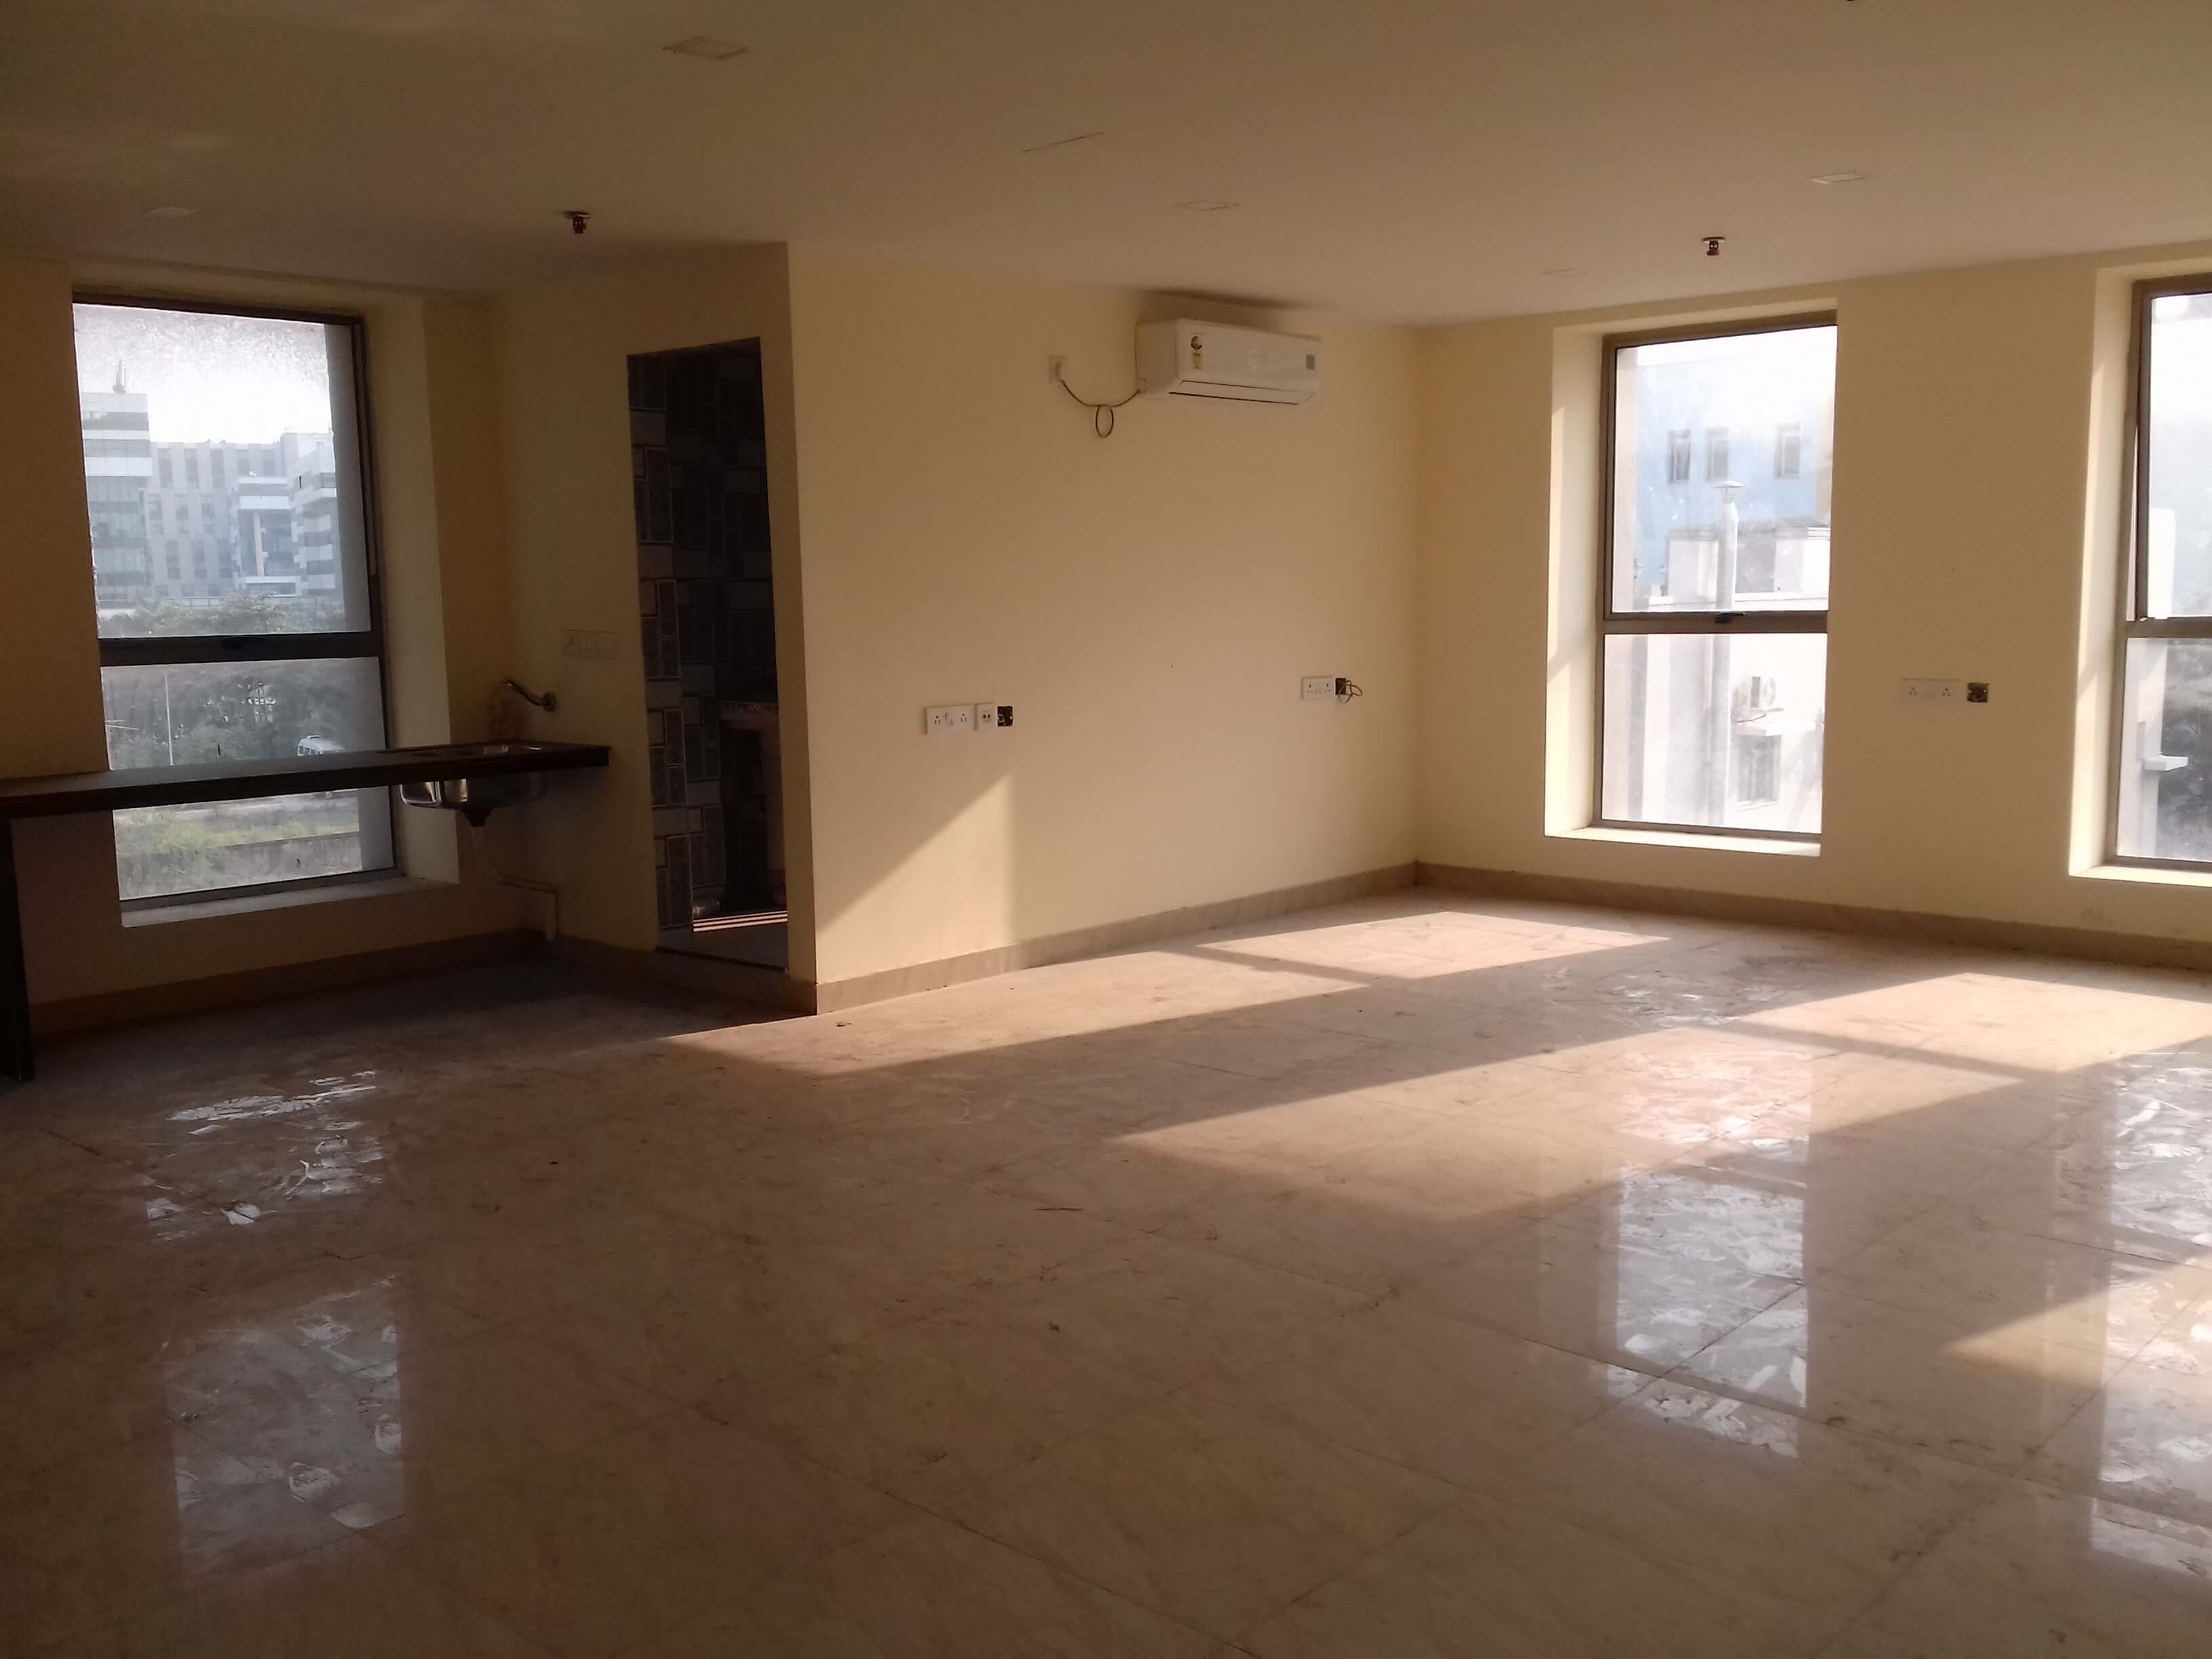 Office For Rent in New Town,Kolkata (Id:8577)	